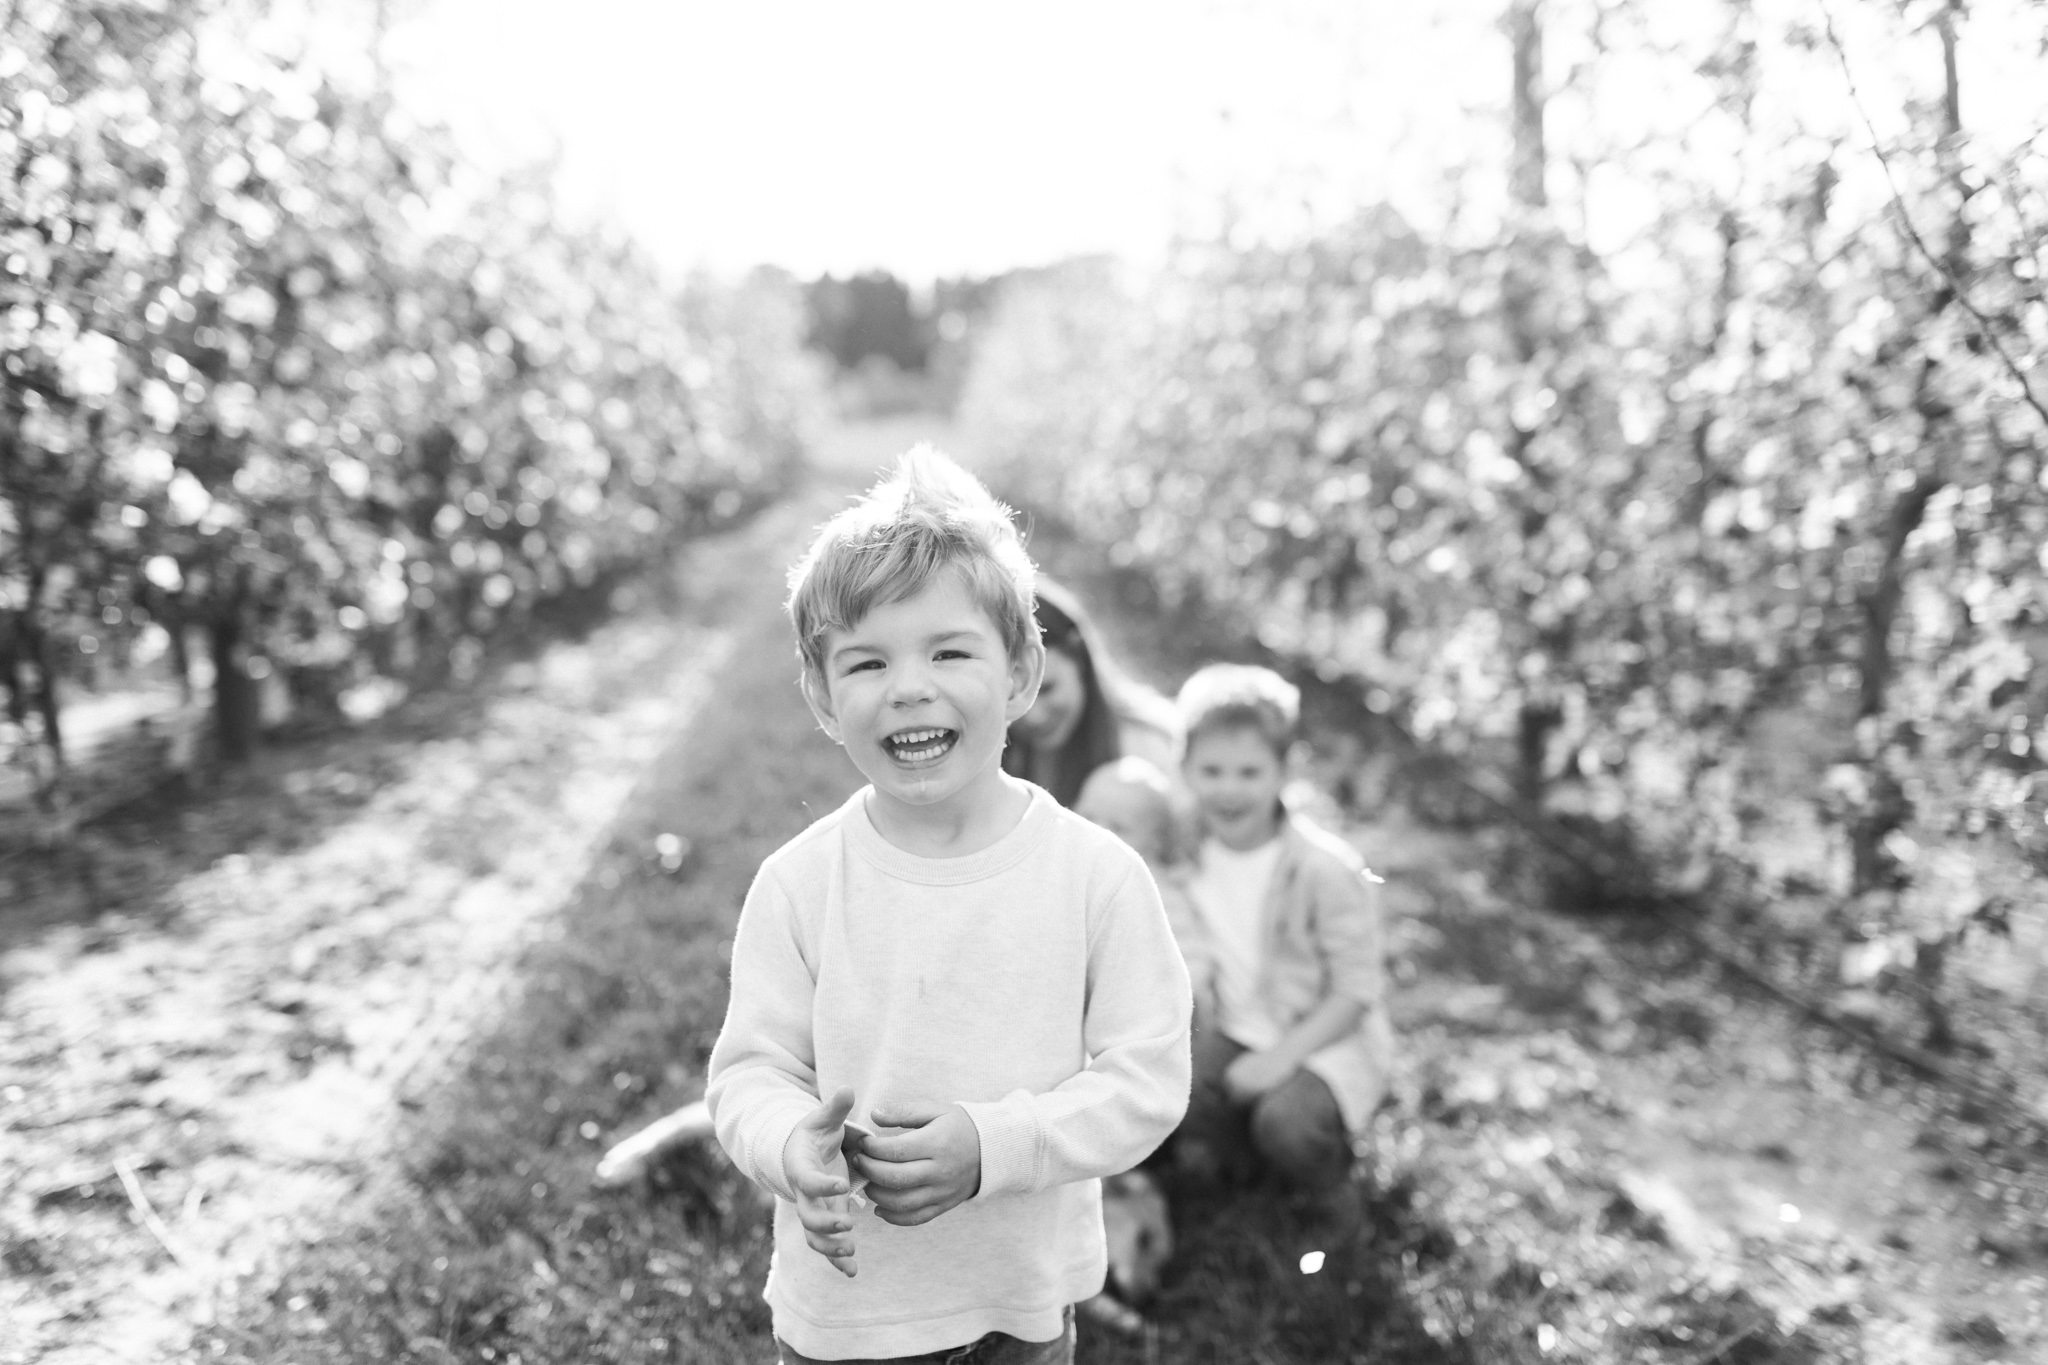 Family Mini Session | Brothers | What to Wear | Family Photos | Orchard with Spring Blooms | Laurenda Marie Photography